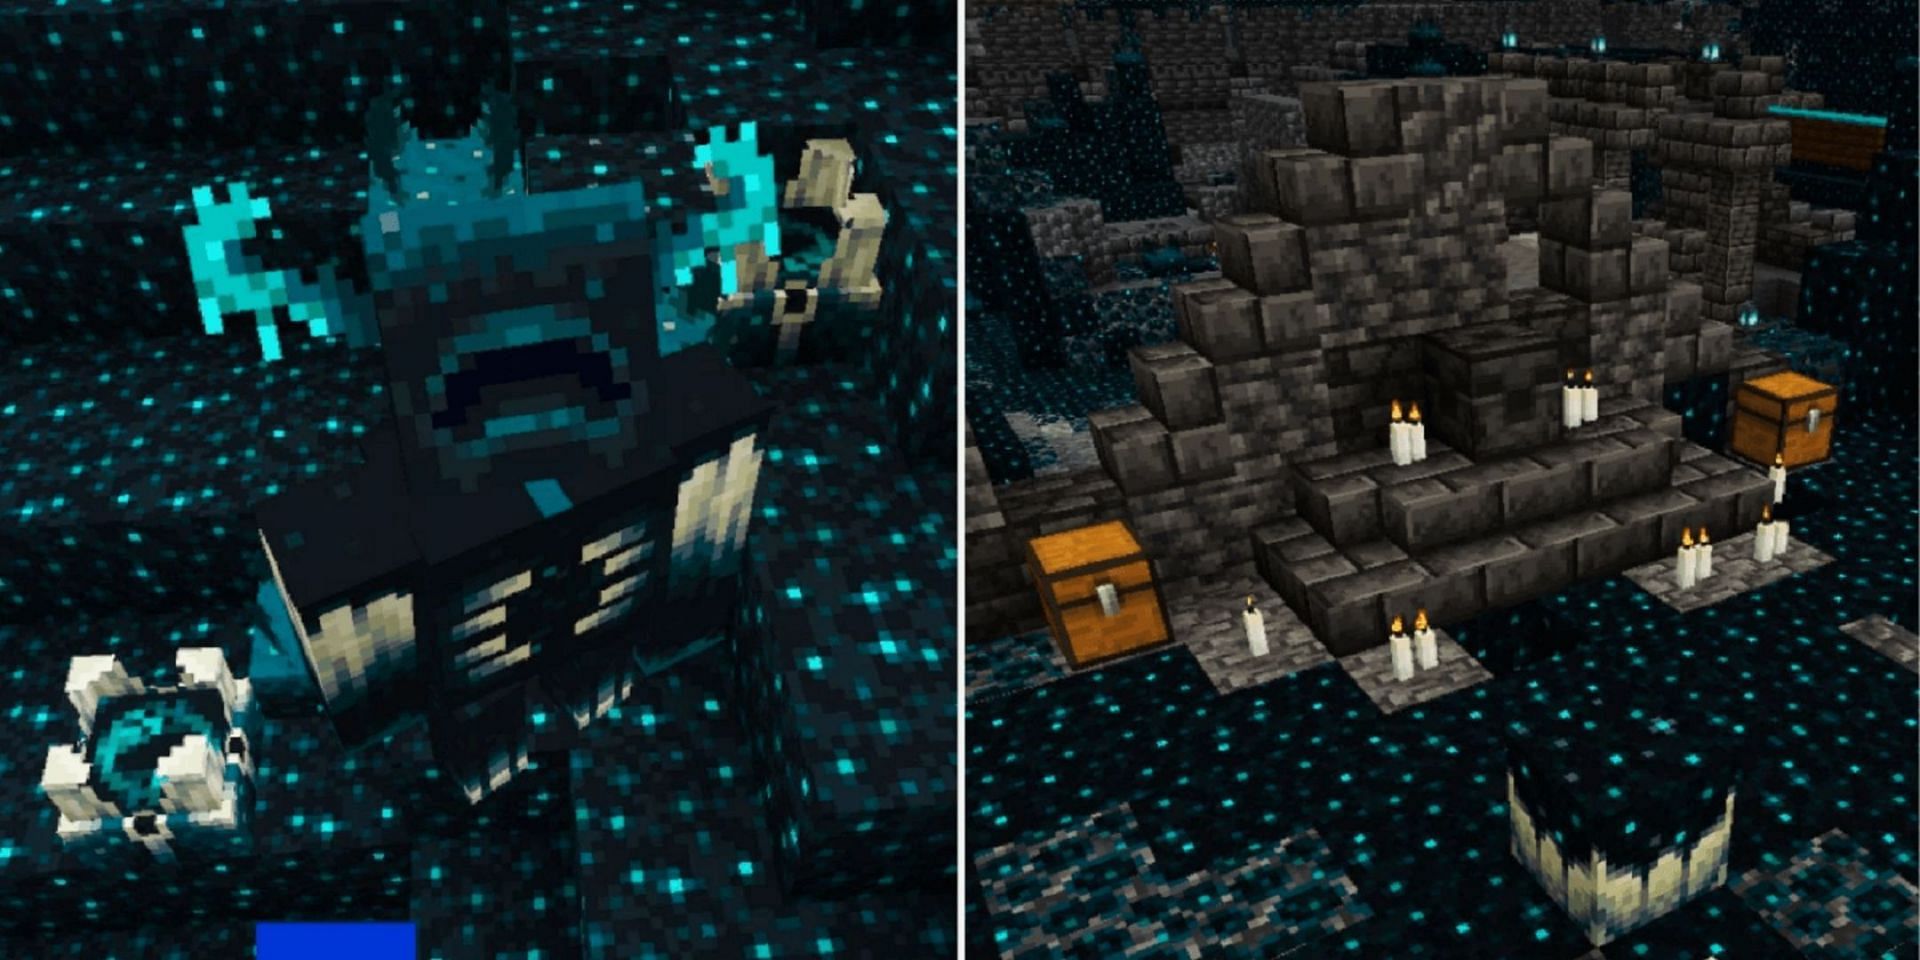 Dangers abound from the beginning in this seed (Image via Mojang)